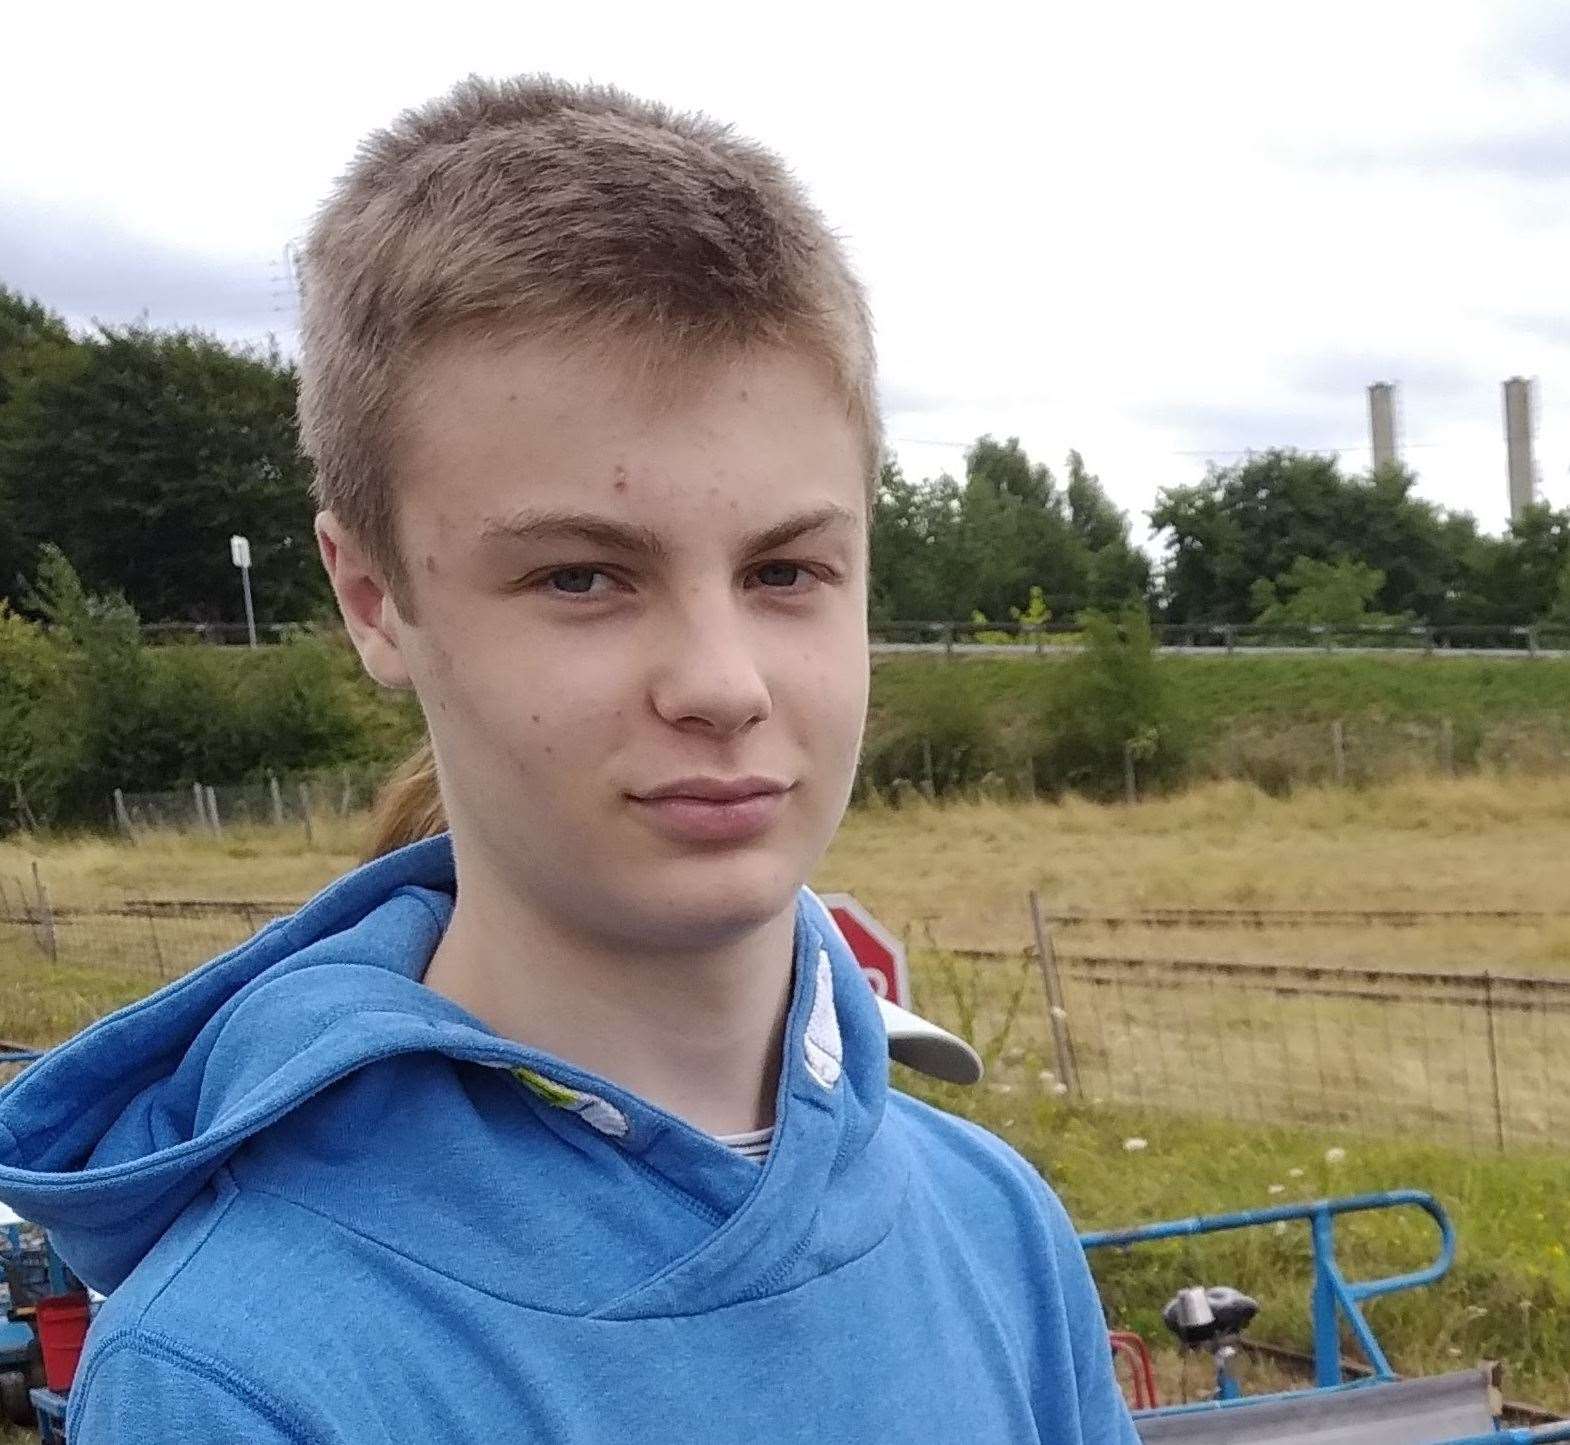 Lucas Webb, 16, took his own life in the run up to Christmas last year